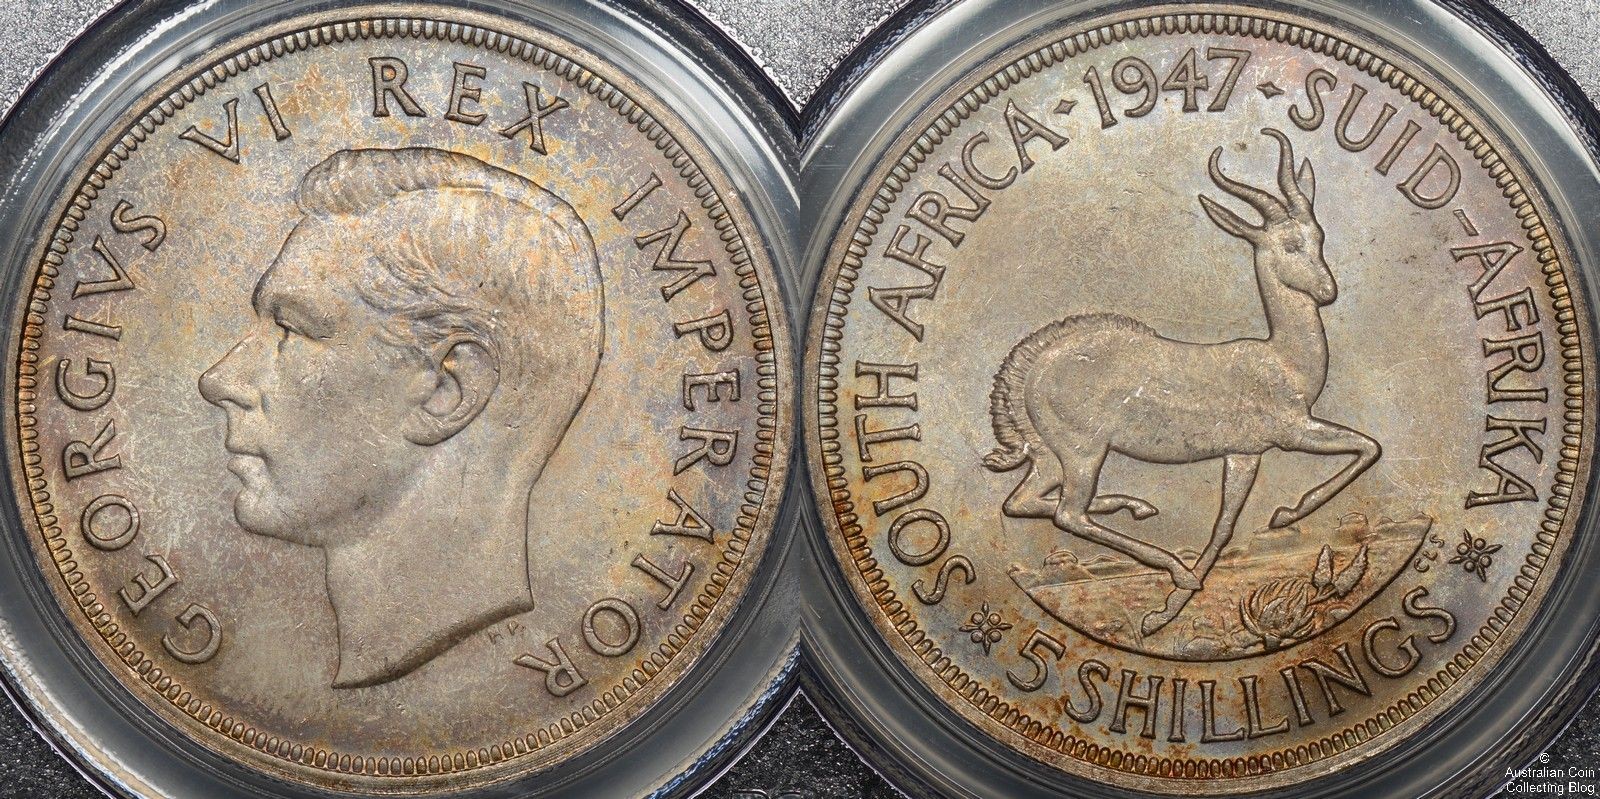 South Africa 1947 5 Shillings PCGS MS65